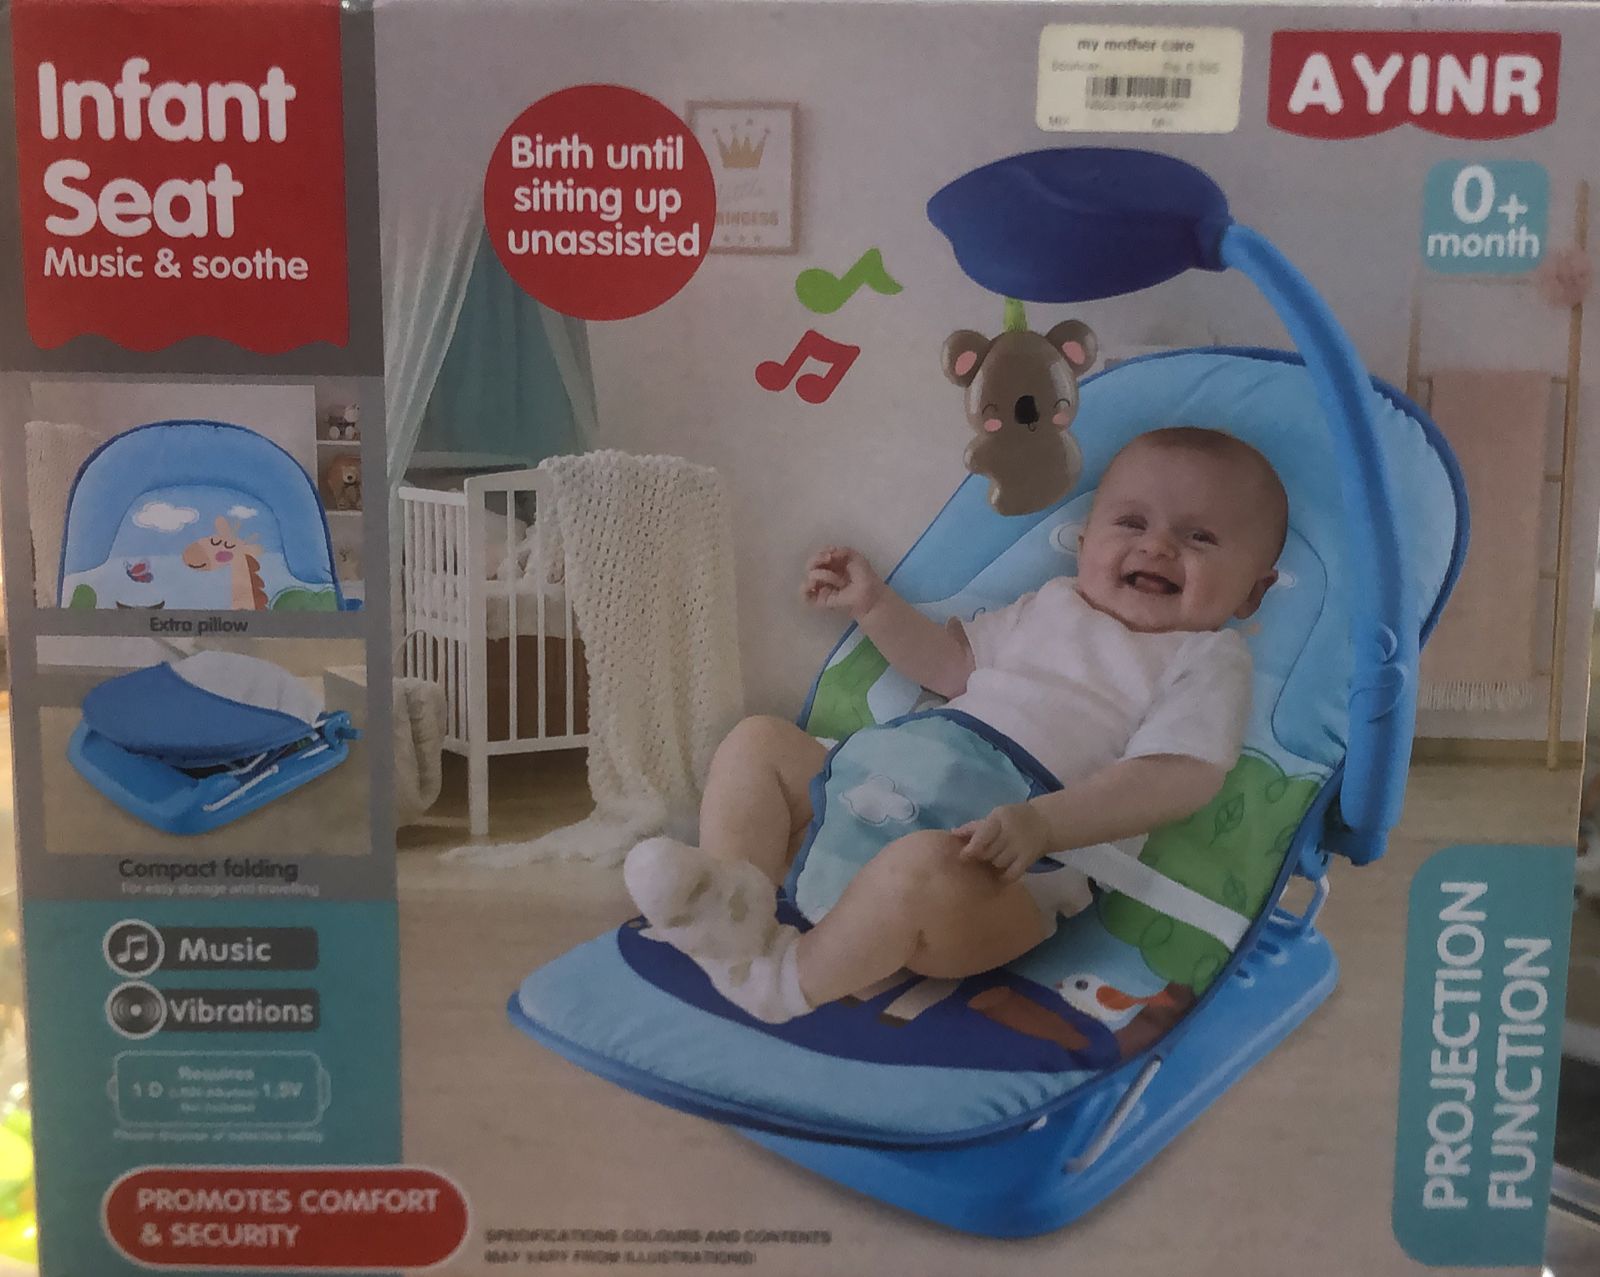 Infant seat and music soothe